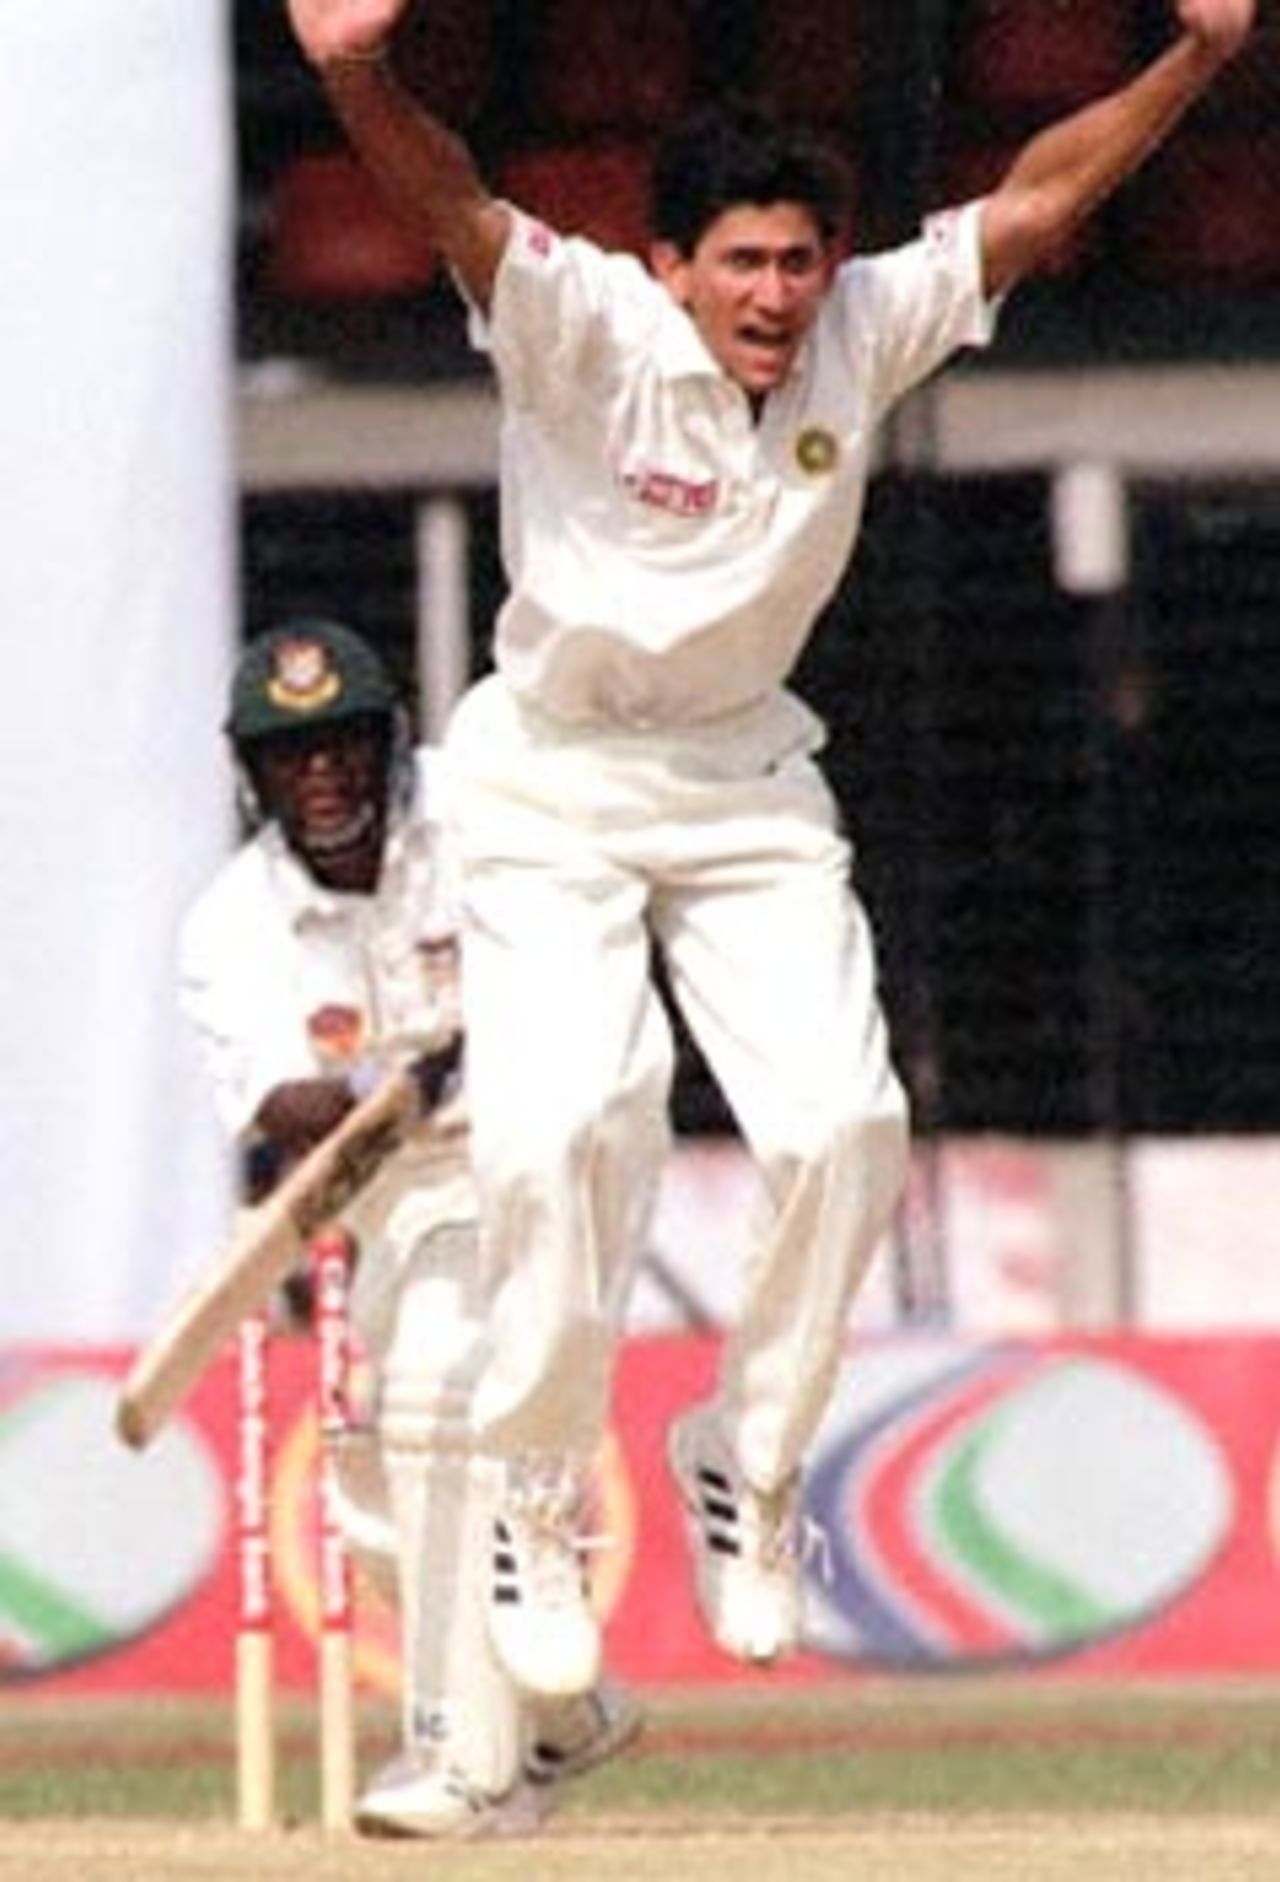 Indian bowler Ajit Agarkar (C-front) jumps and shout for LBW against Bangladeshi batsman Aminul Islam (L-back) 13 November 2000 at the Bangabandhu National Stadium on the fourth day of this South Asian country's inaugural Test match against India. India won by nine wickets by the end of the fourth day's play of the five day test match.